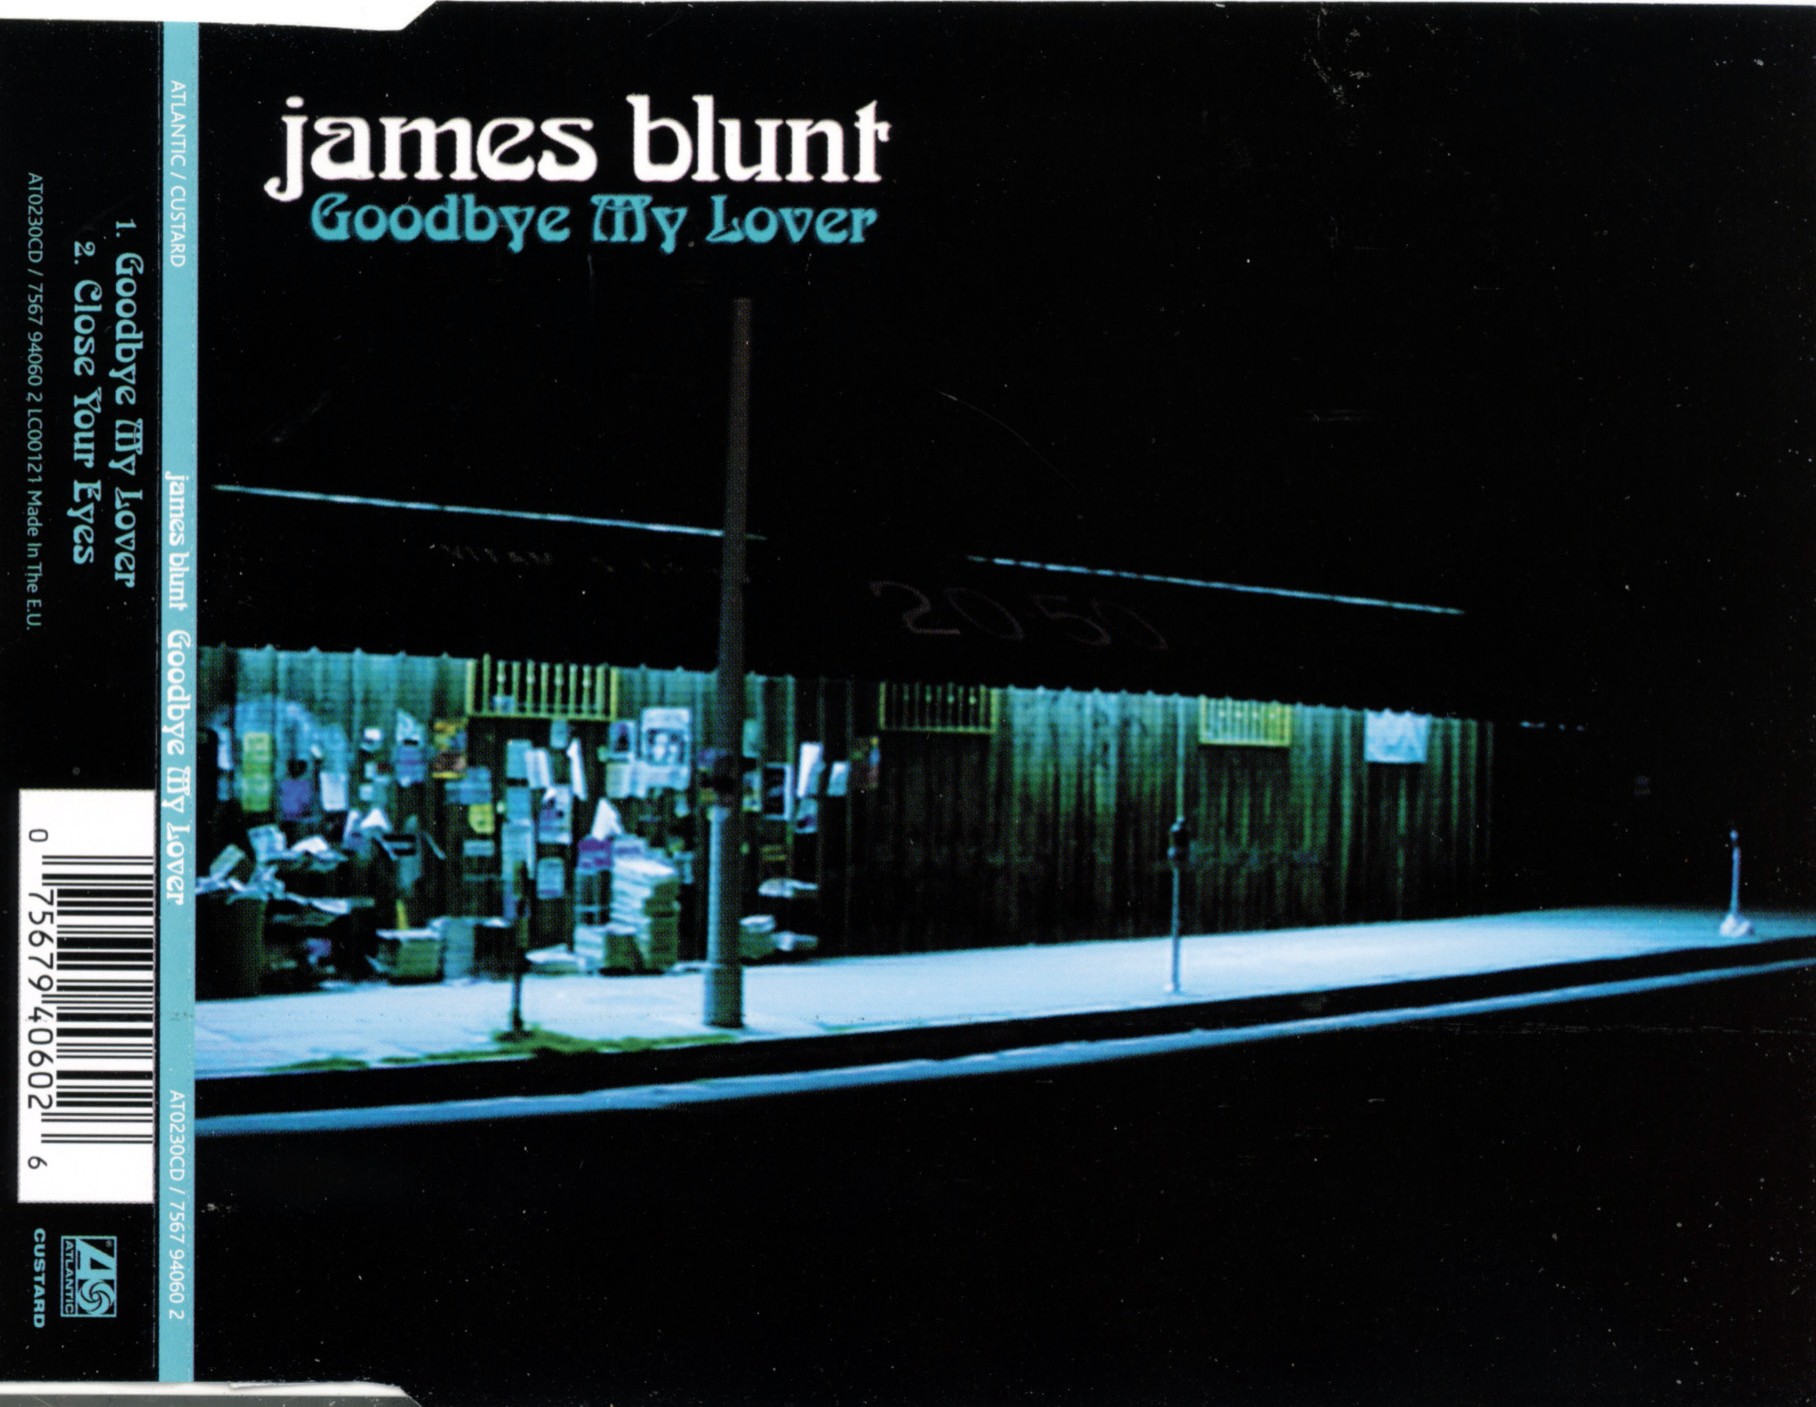 James Blunt - Goodbye My Lover OFFICIAL VIDEO - YouTube